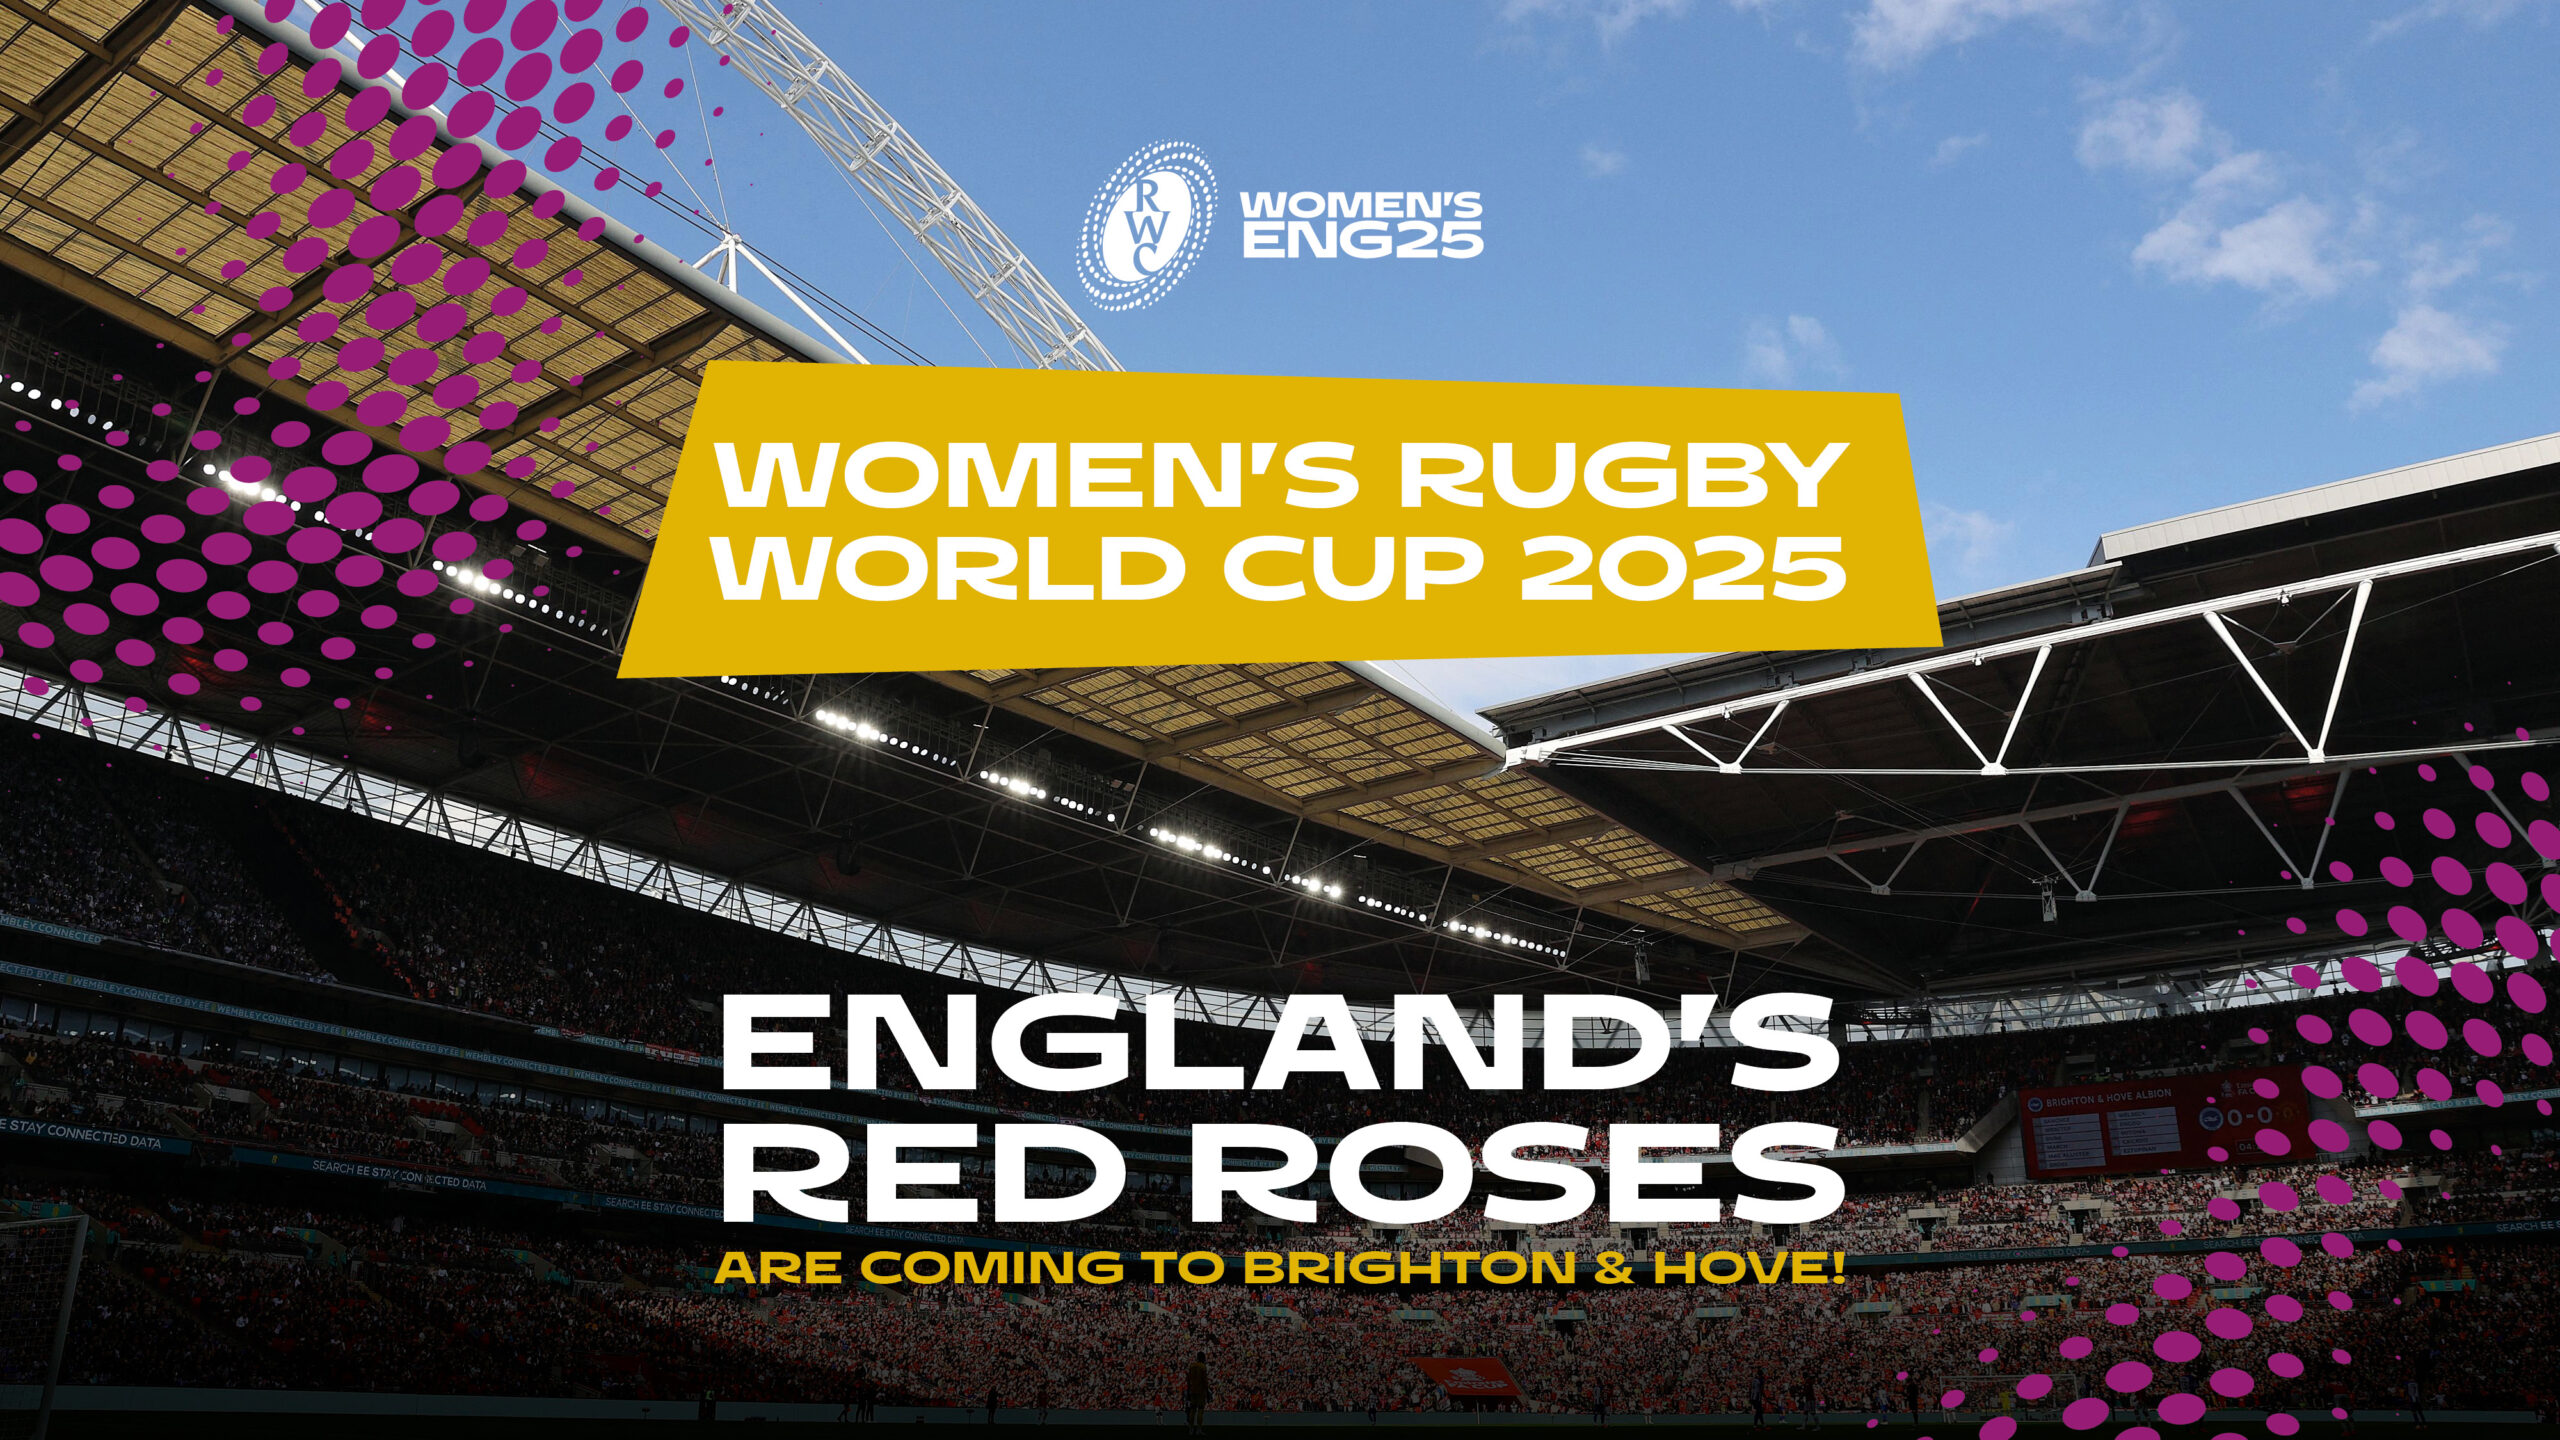 England’s Red Roses set to thrill crowds in Brighton & Hove at next year’s Women’s Rugby World Cup